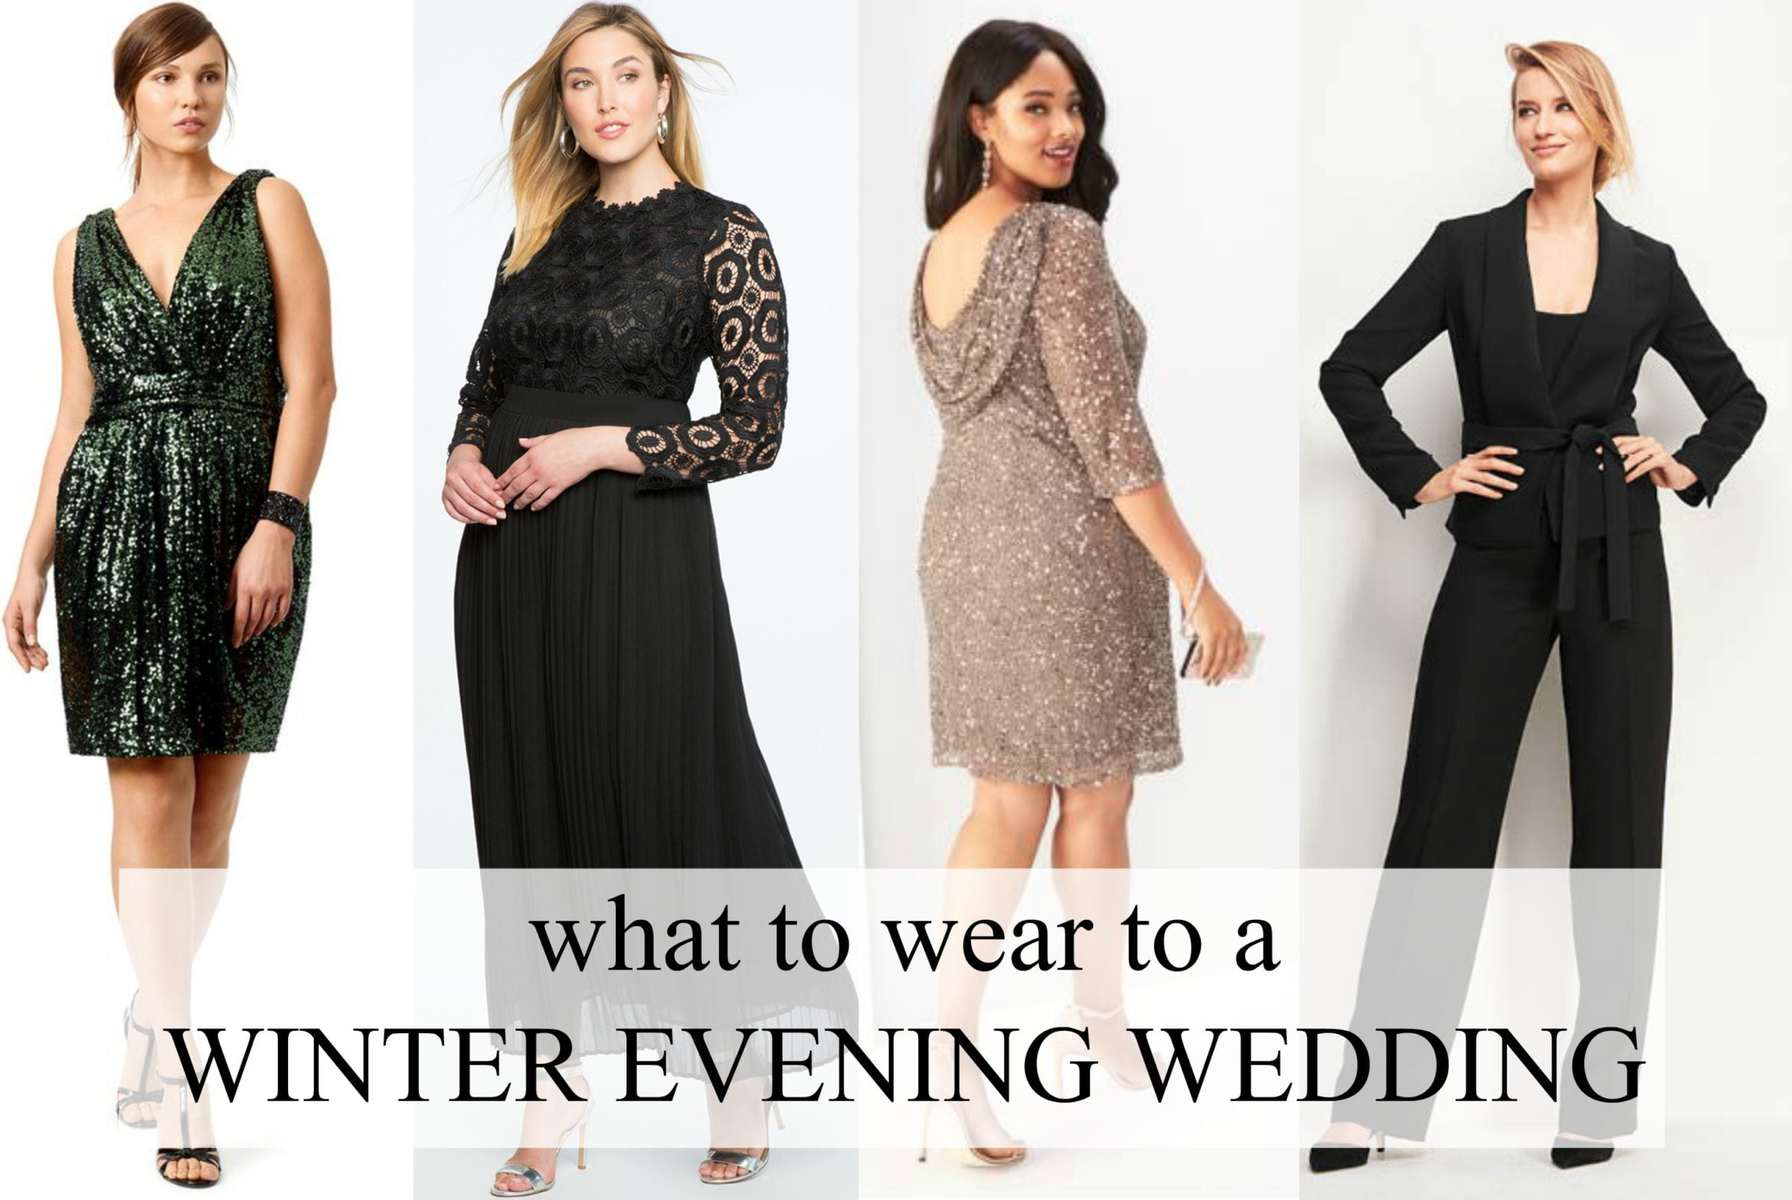 What to Wear to a Winter Evening Wedding